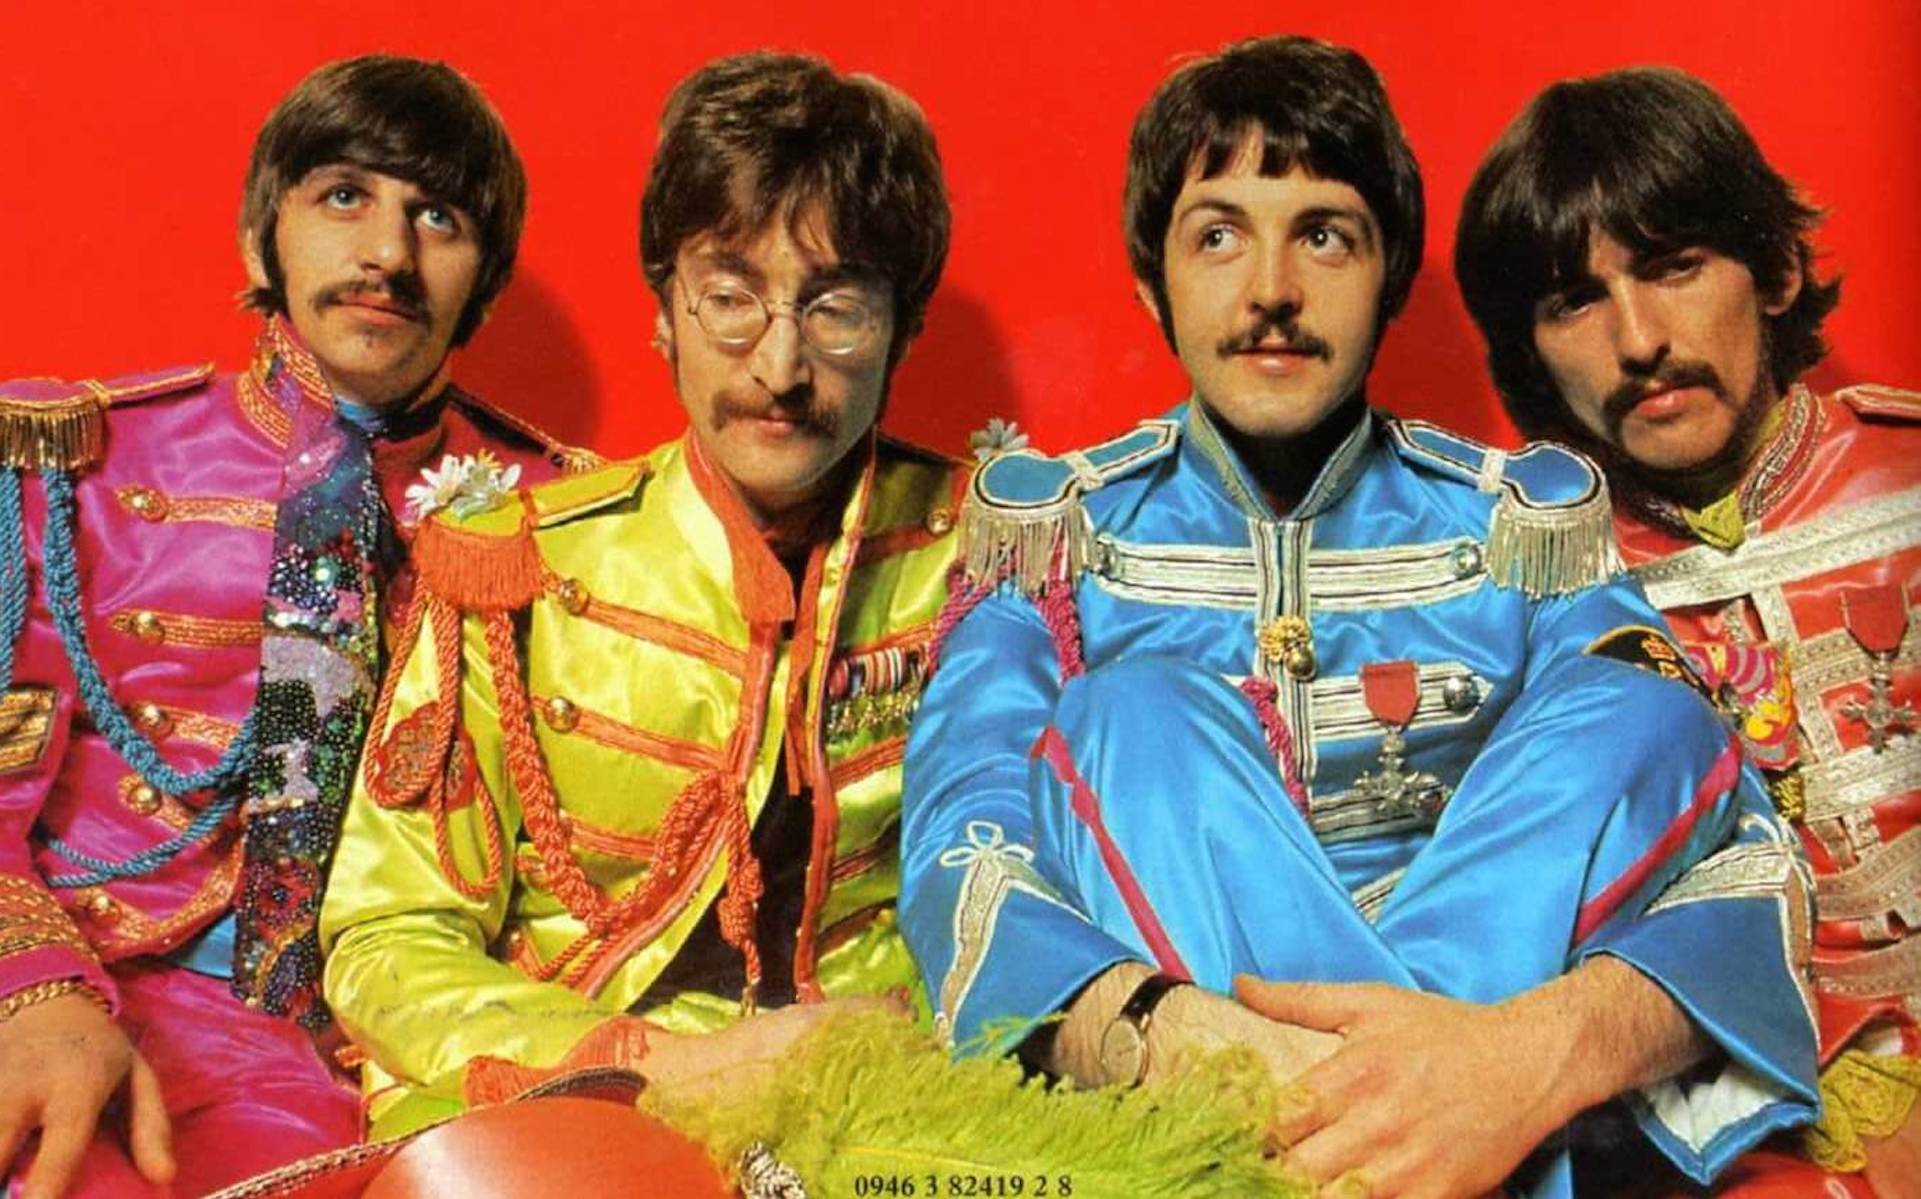 Группа 50 17. Битлз сержант Пеппер. Sgt Pepper's Lonely Hearts Club Band. Sgt. Pepper s Lonely Hearts Club Band the Beatles. The Beatles 1967.